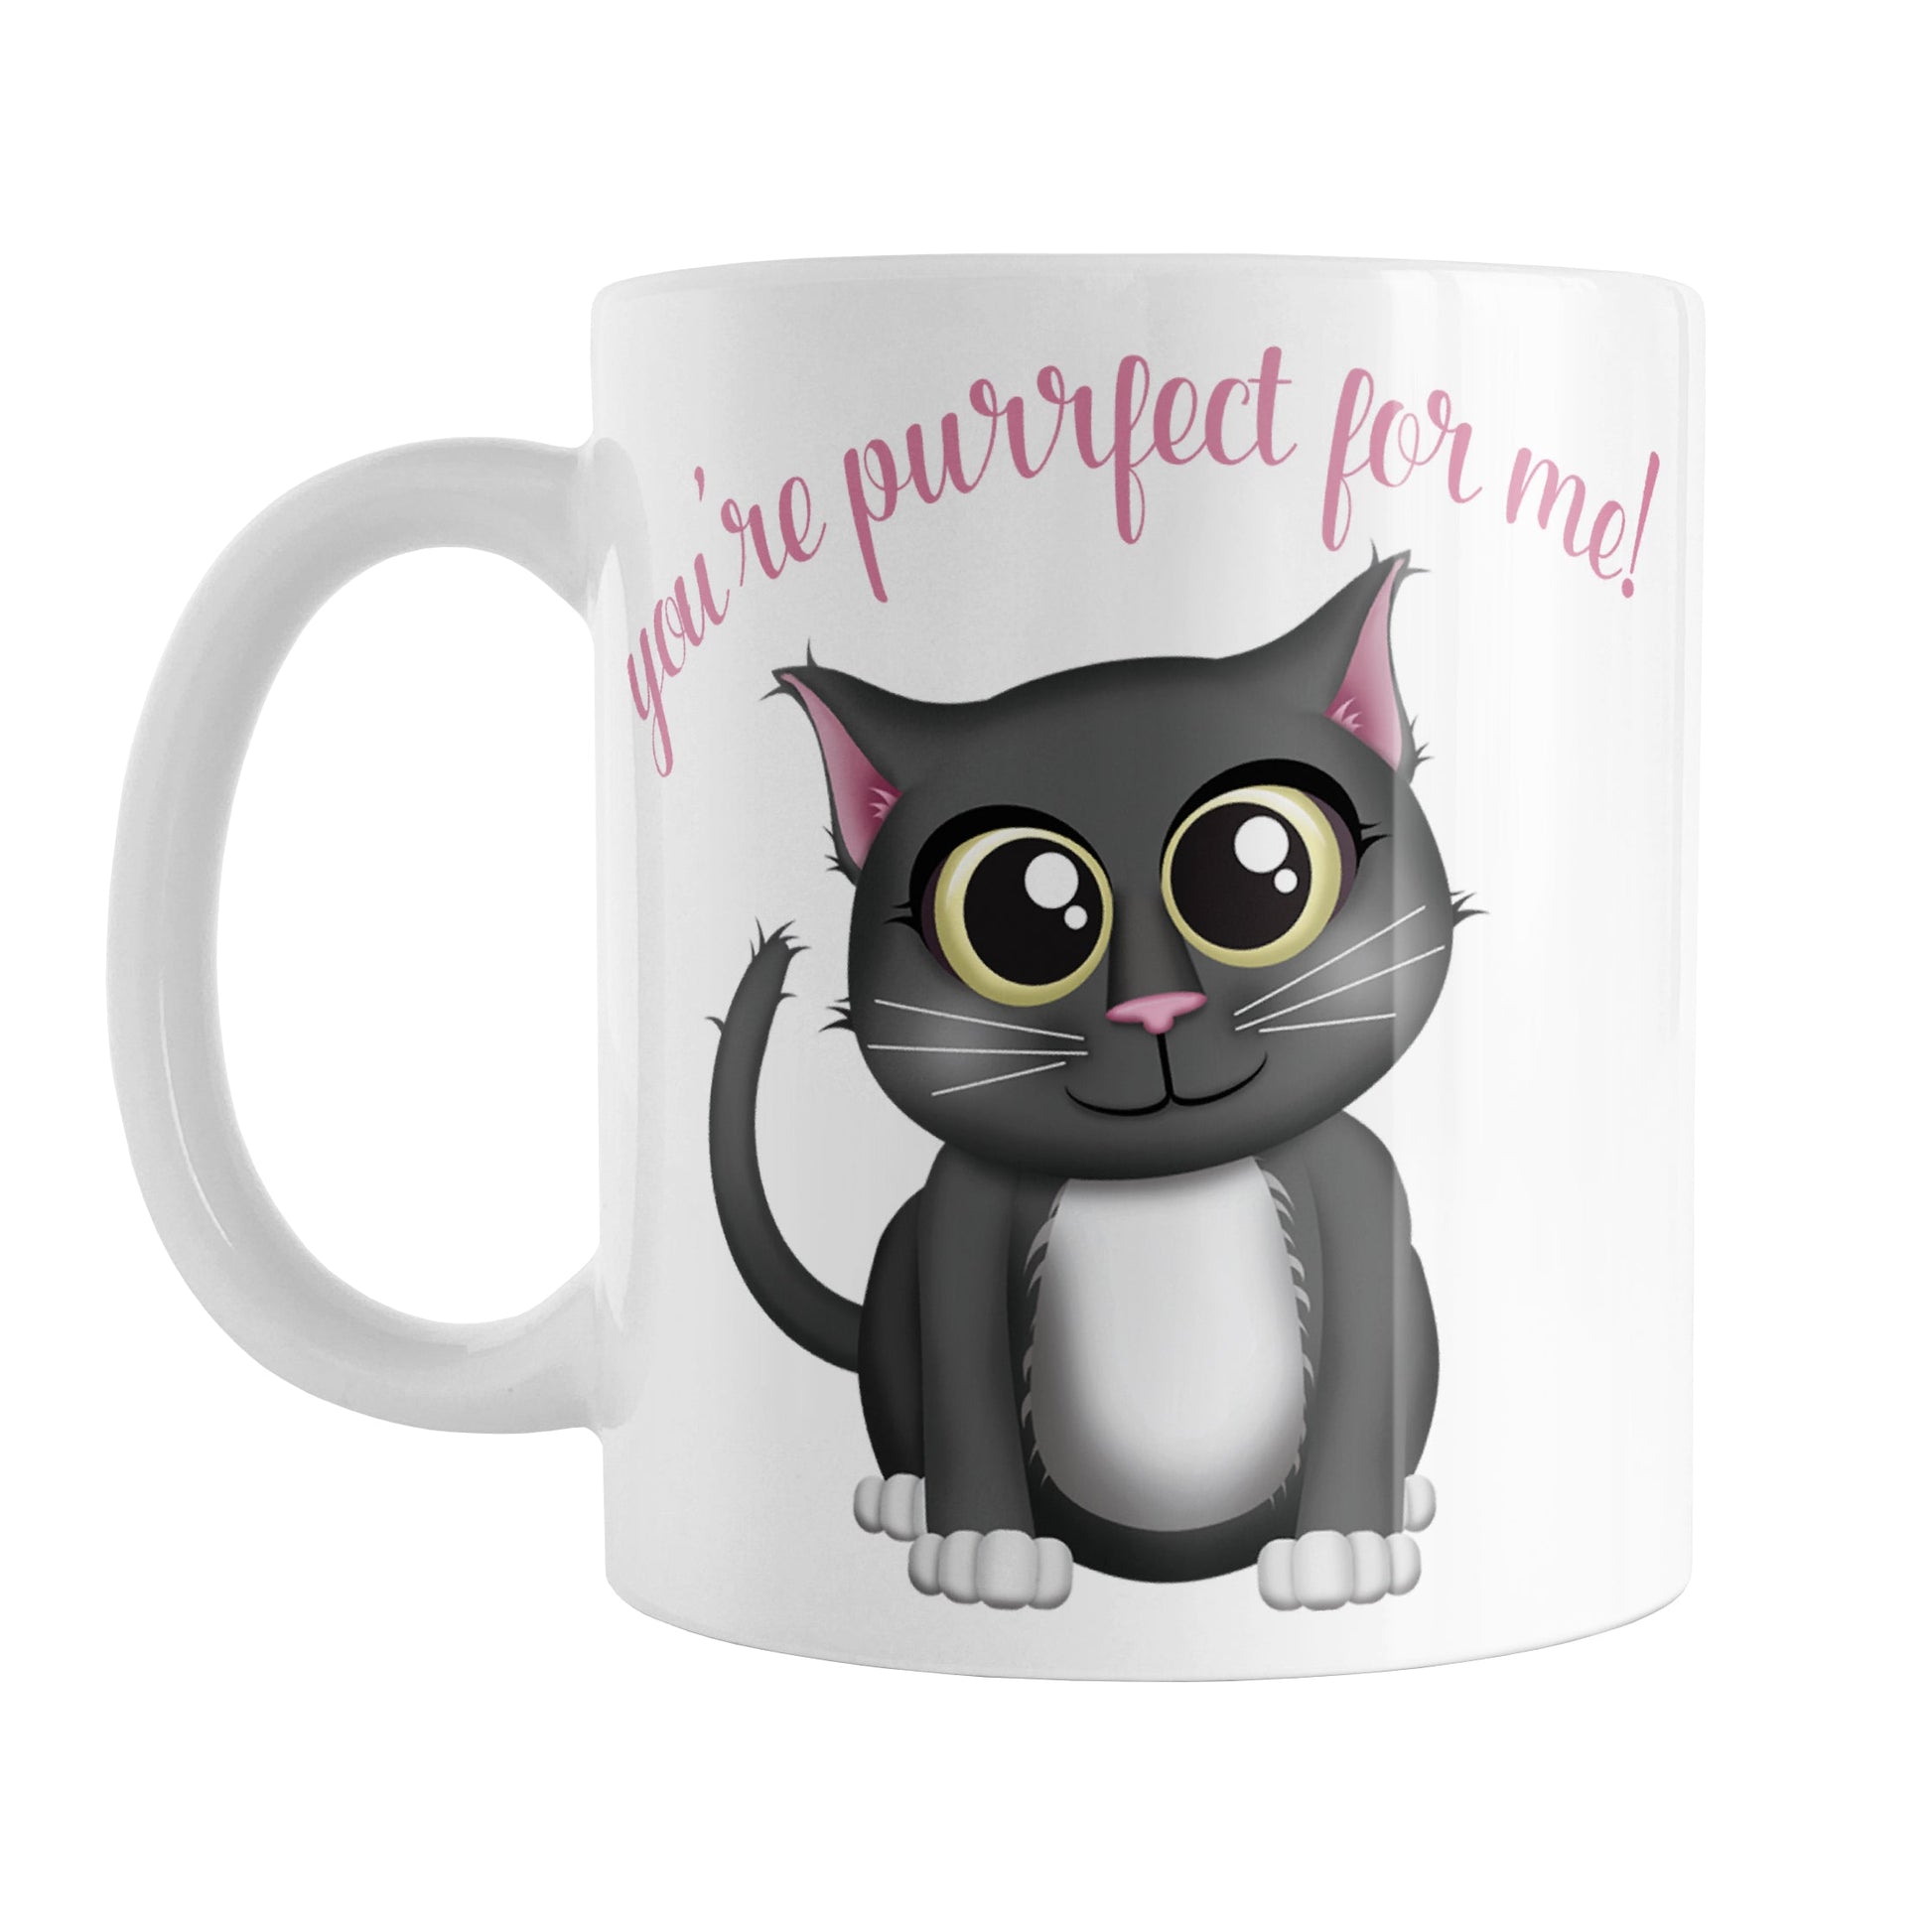 You're Purrfect for Me - Cute Gray Cat Mug (11oz) at Amy's Coffee Mugs